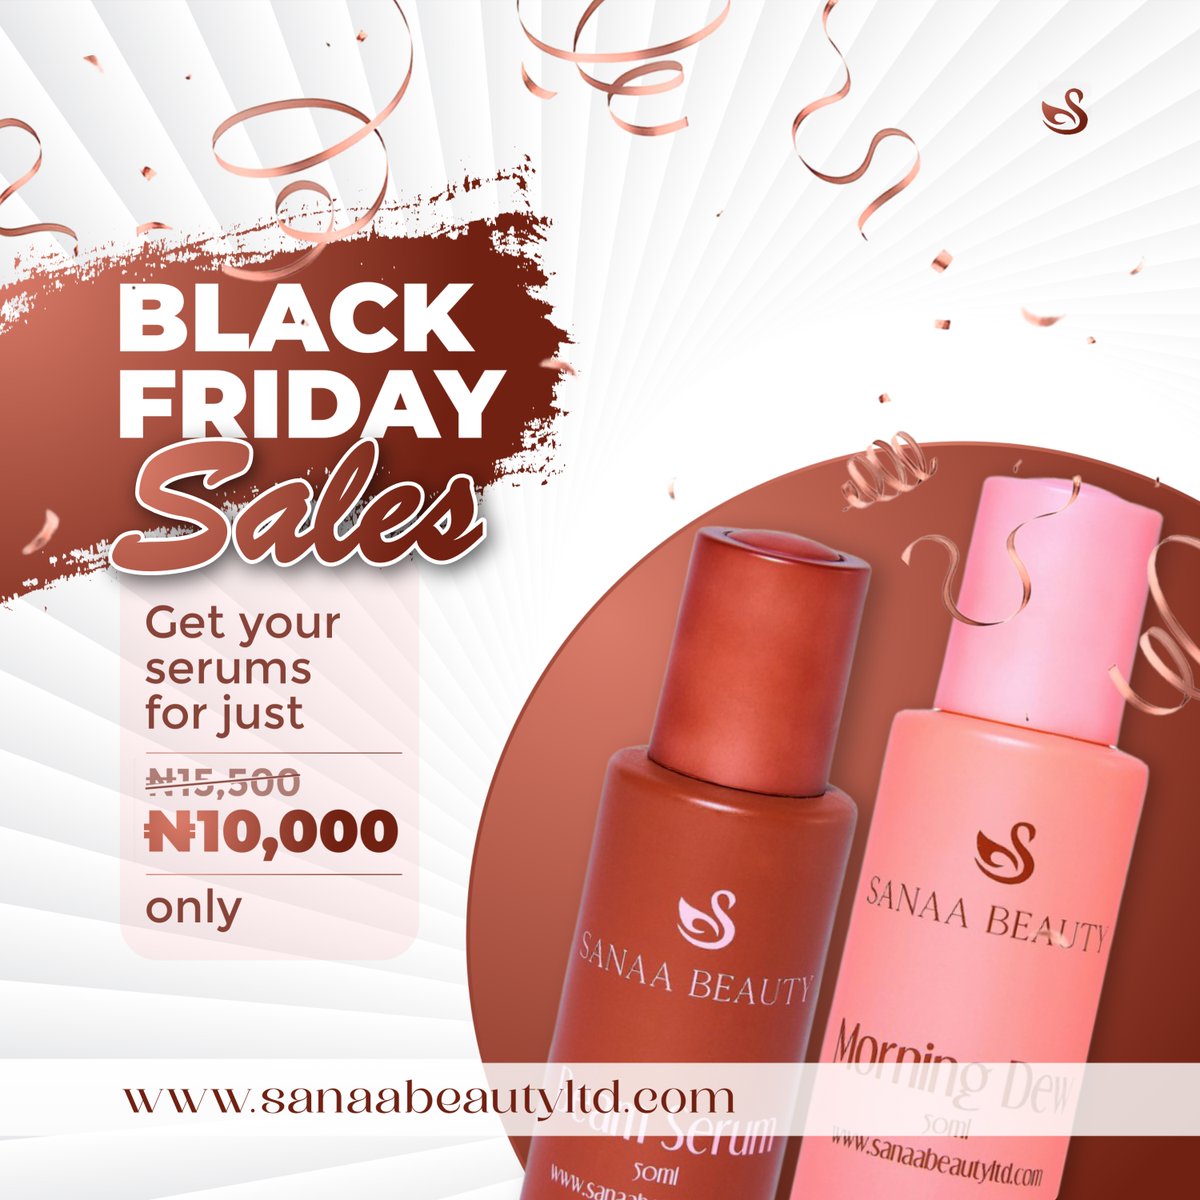 Unlock the secrets to radiant skin this Black Friday!

Treat yourself to Sanaa Beauty serums at a jaw-dropping 10,000 NGN per bottle until Nov 26th. 

Your skin deserves the royal treatment! Grab yours and let your glow shine through! 🌟💖 

#SanaaBlackFriday #RadianceUnleashed